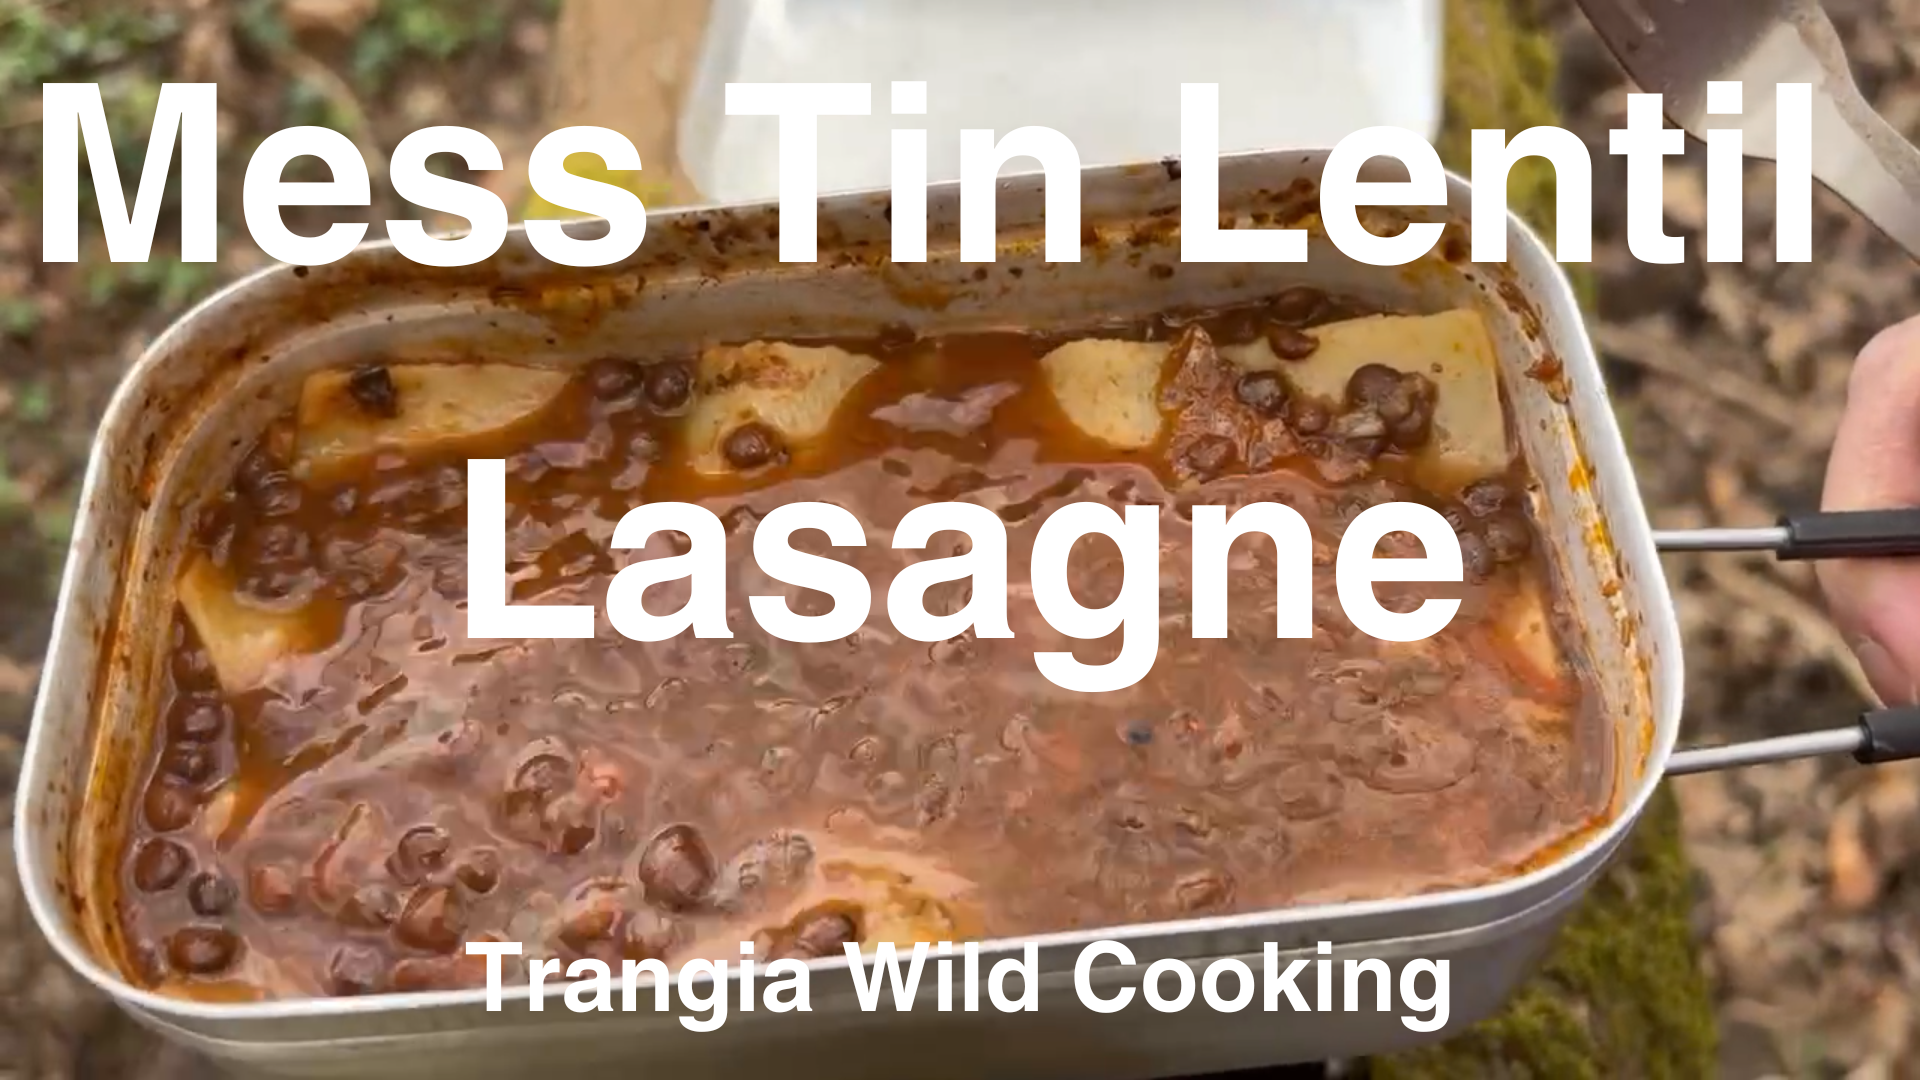 image from Mess tin lentil lasagne